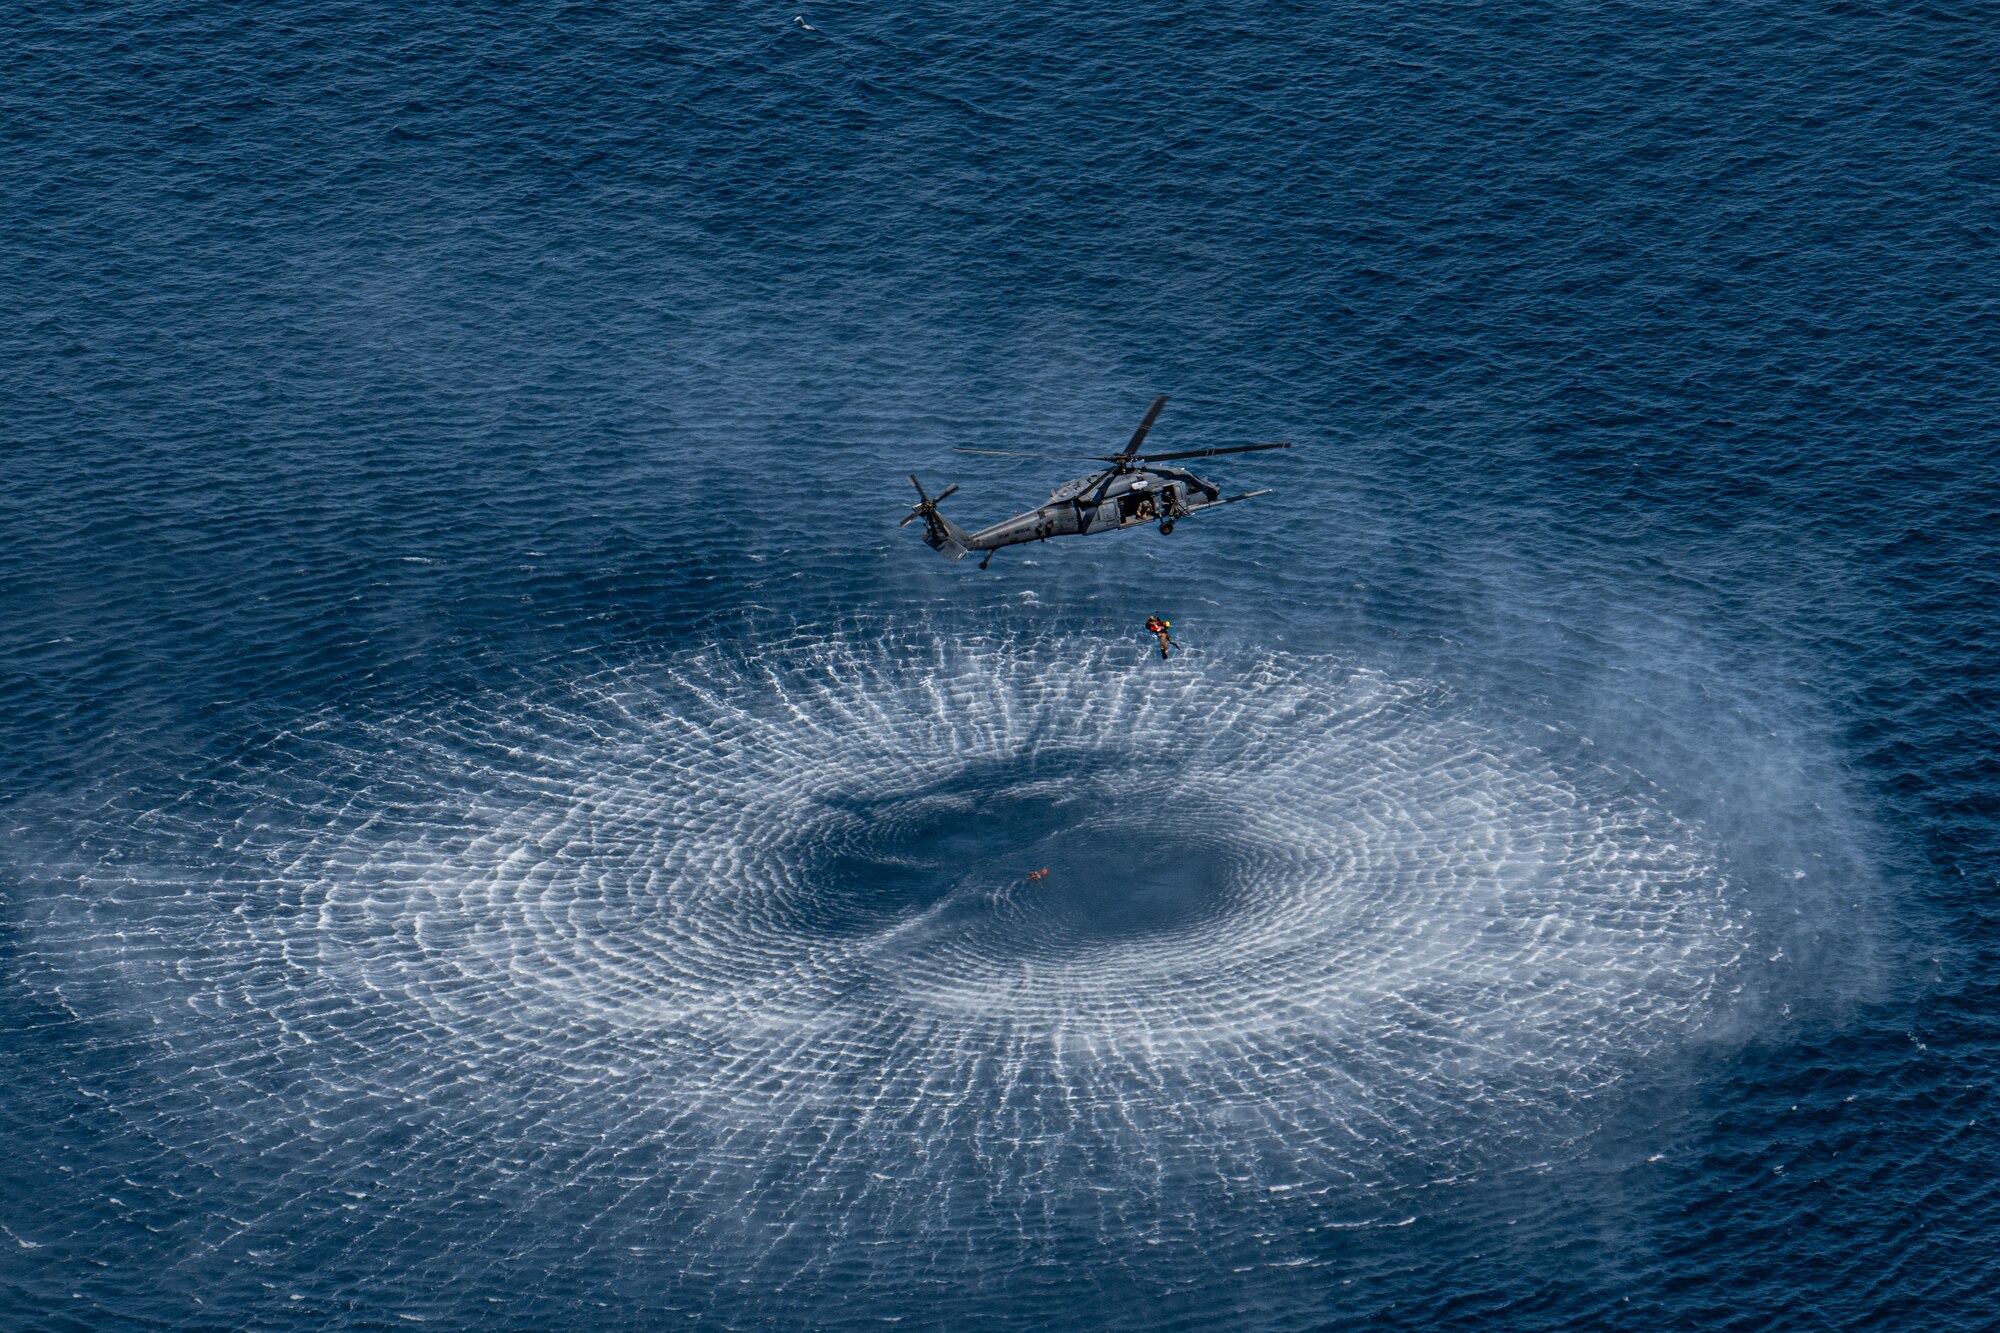 A U.S. Air Force HH-60G Pavehawk assigned to the 33rd Rescue Squadron retrieves pararescuemen and patients from the water during open water rescue training off the shores of Okinawa, Japan, July 20, 2023. Working with HC-130J Super Hercules assigned to the 79th RQS from Davis-Monthan Air Force Base, pararescuemen and rescue craft were deployed to rescue simulated patients and conduct medical treatment until extracted via HH-60G. (U.S. Air Force photo by Senior Airman Cedrique Oldaker)